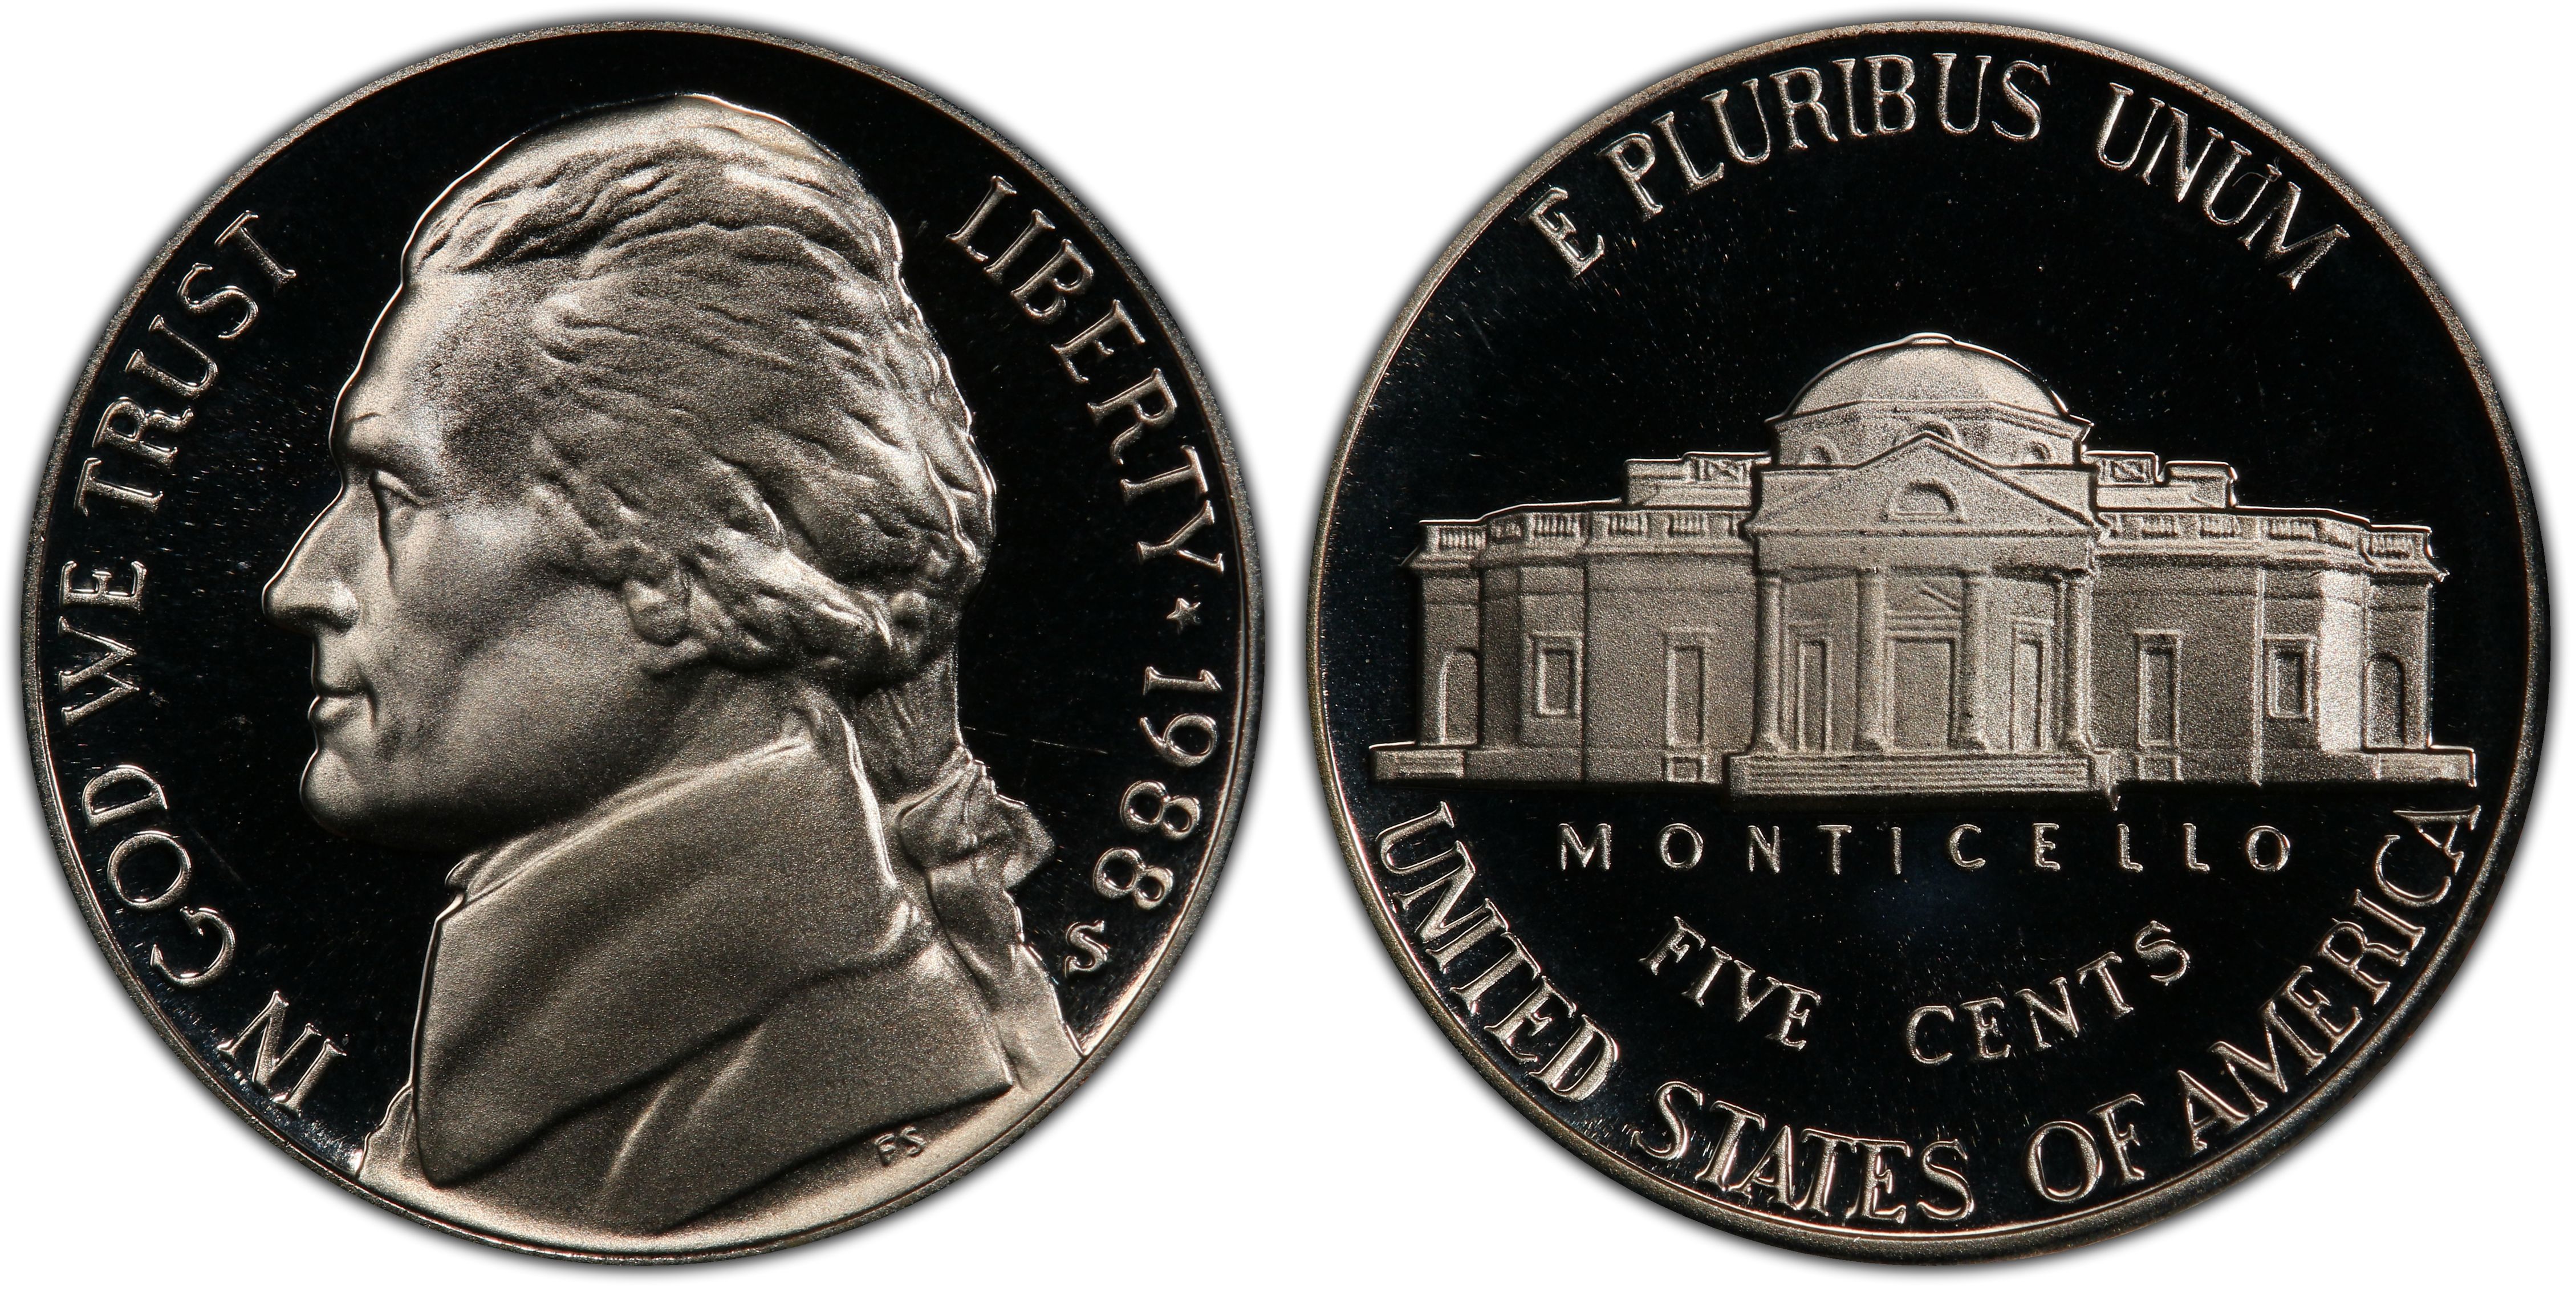 Nice 1988 s Proof Jefferson Nickel # JN 08  20 Available  Buy 1 or up to  20